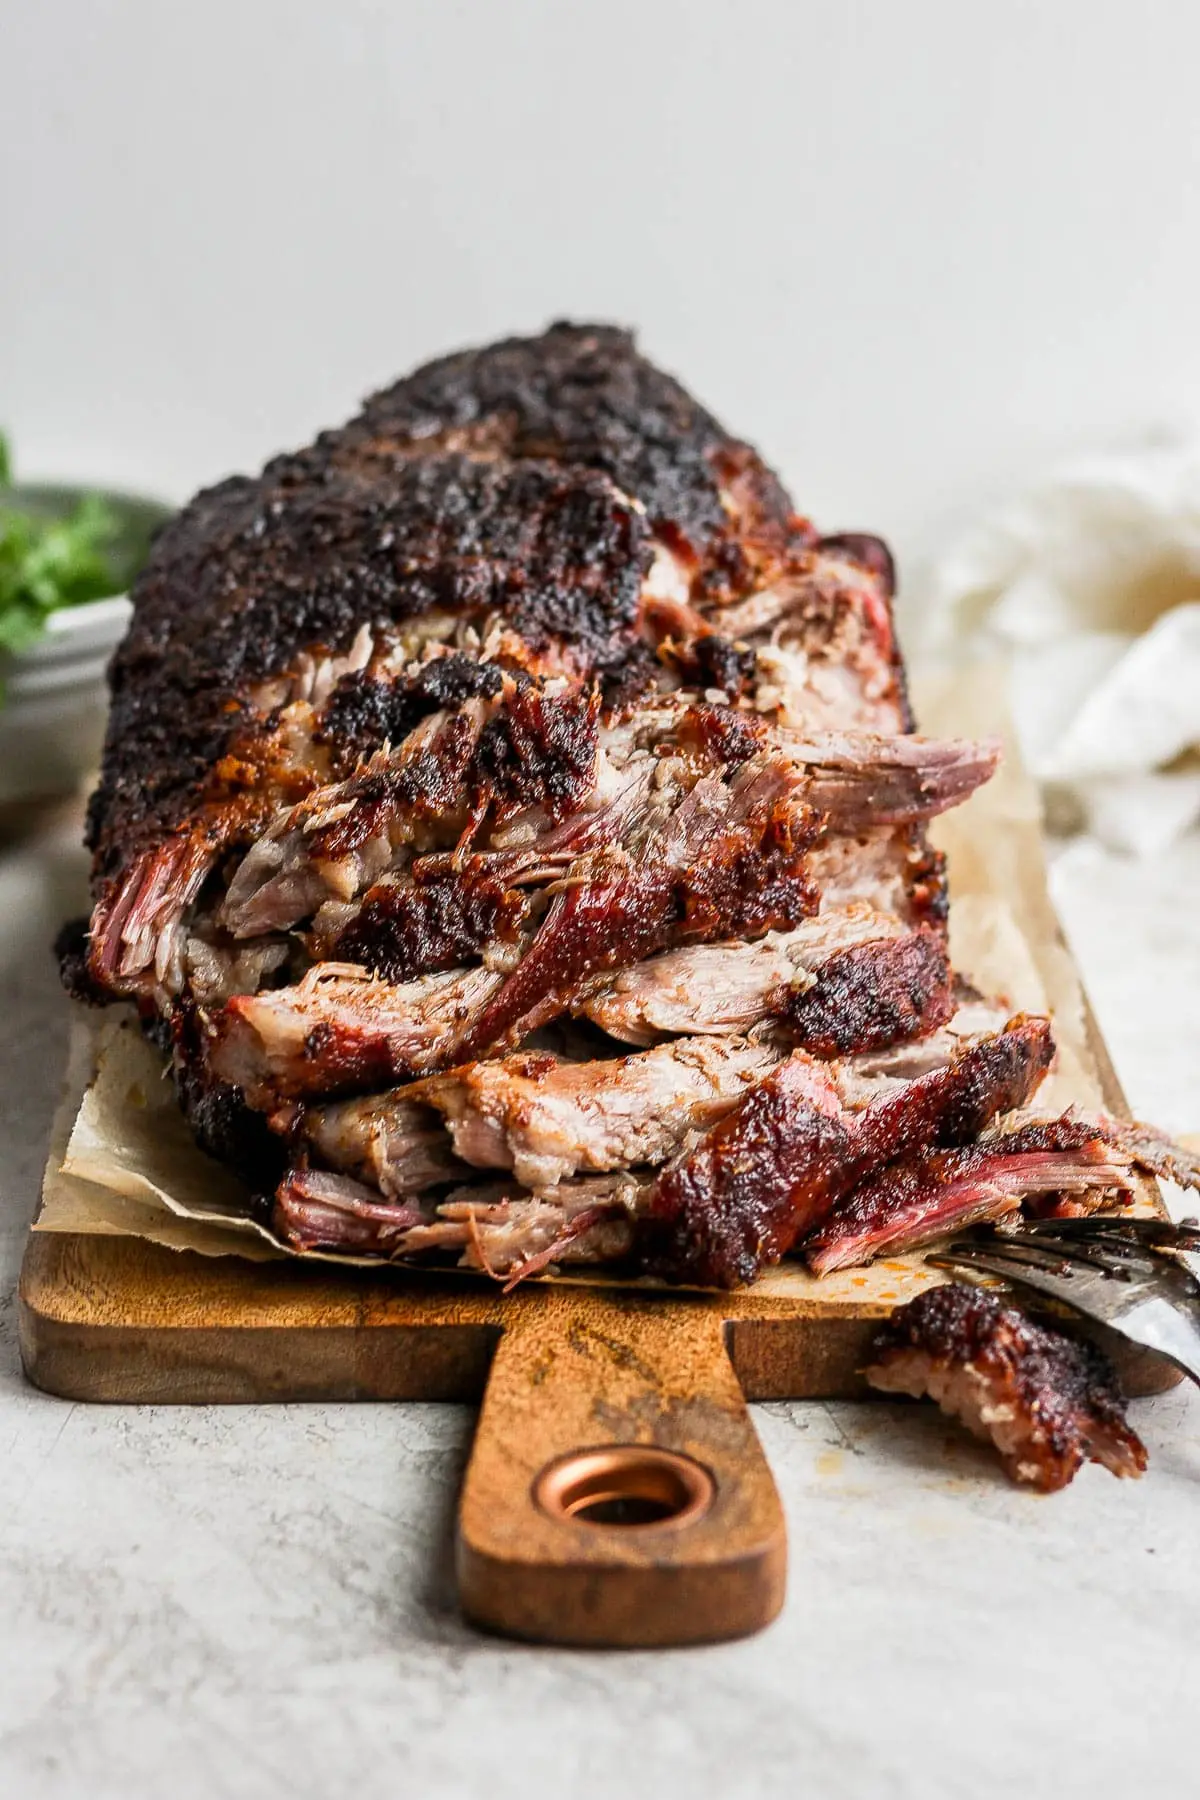 how long to let smoked pork shoulder rest - What happens if you don't let pork shoulder rest